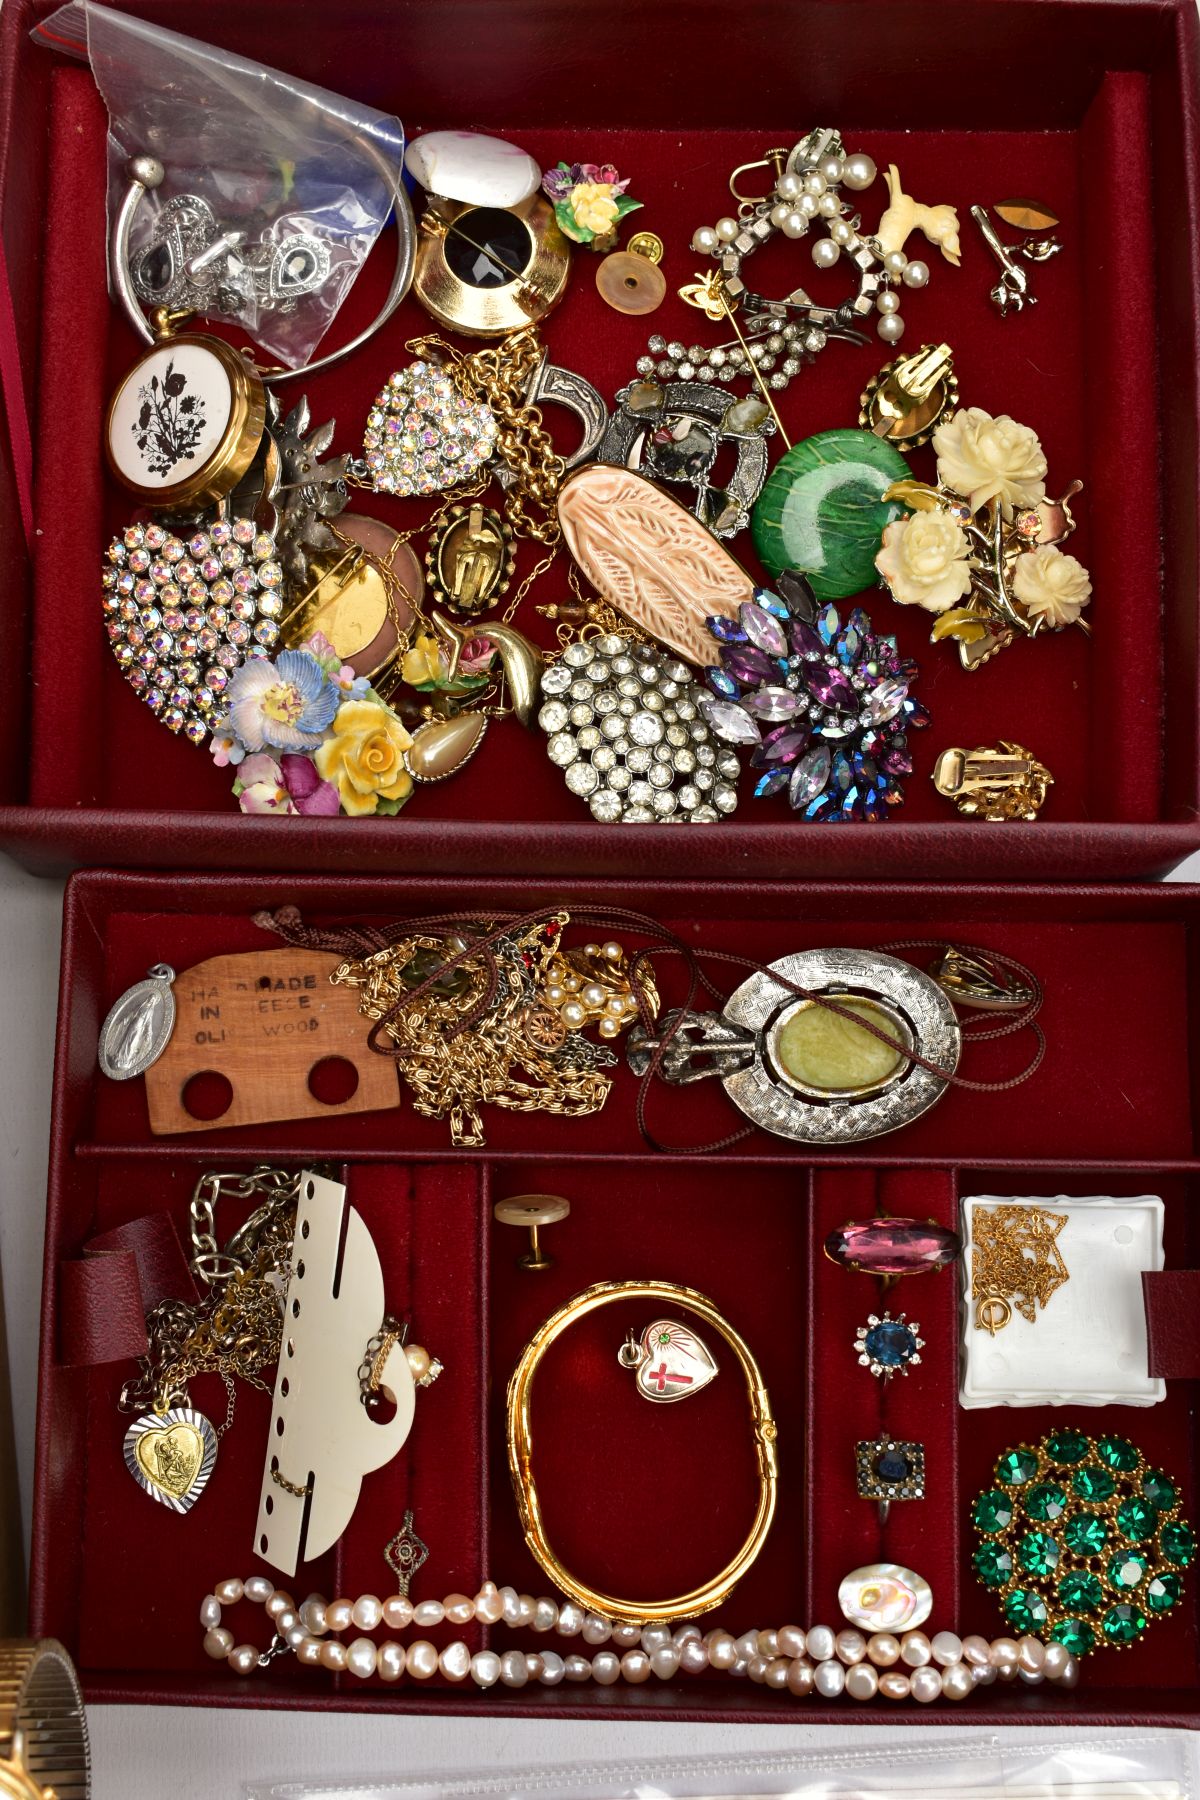 A BOX OF MISCELLANEOUS ITEMS, to include foreign currency in notes, British coins, costume jewellery - Image 2 of 6